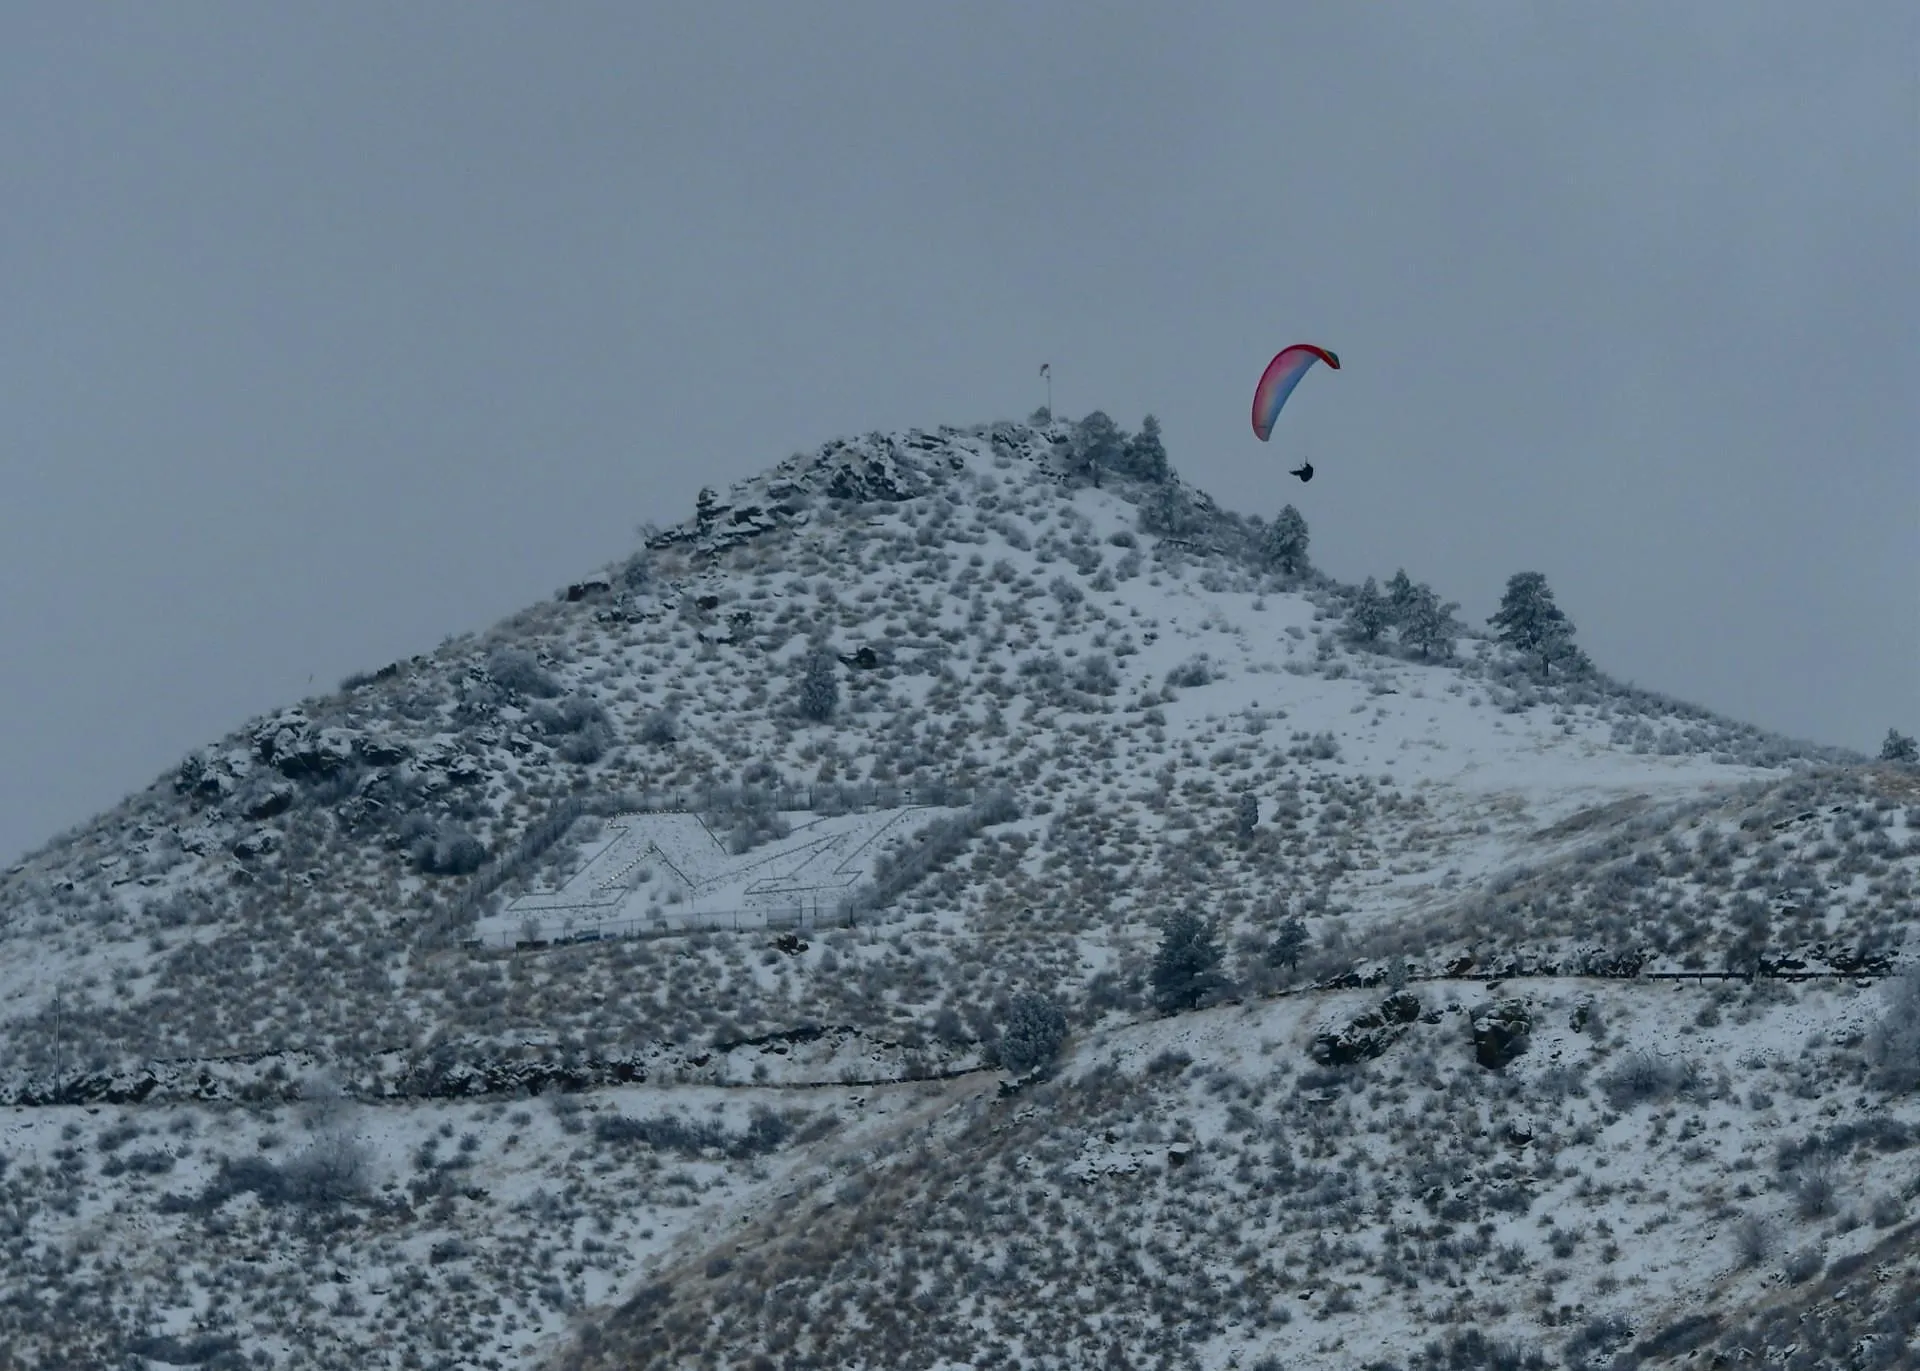 Hang glider with a brightly colored sail drifts near the peak of Mount Zion on a dark, snowy day.